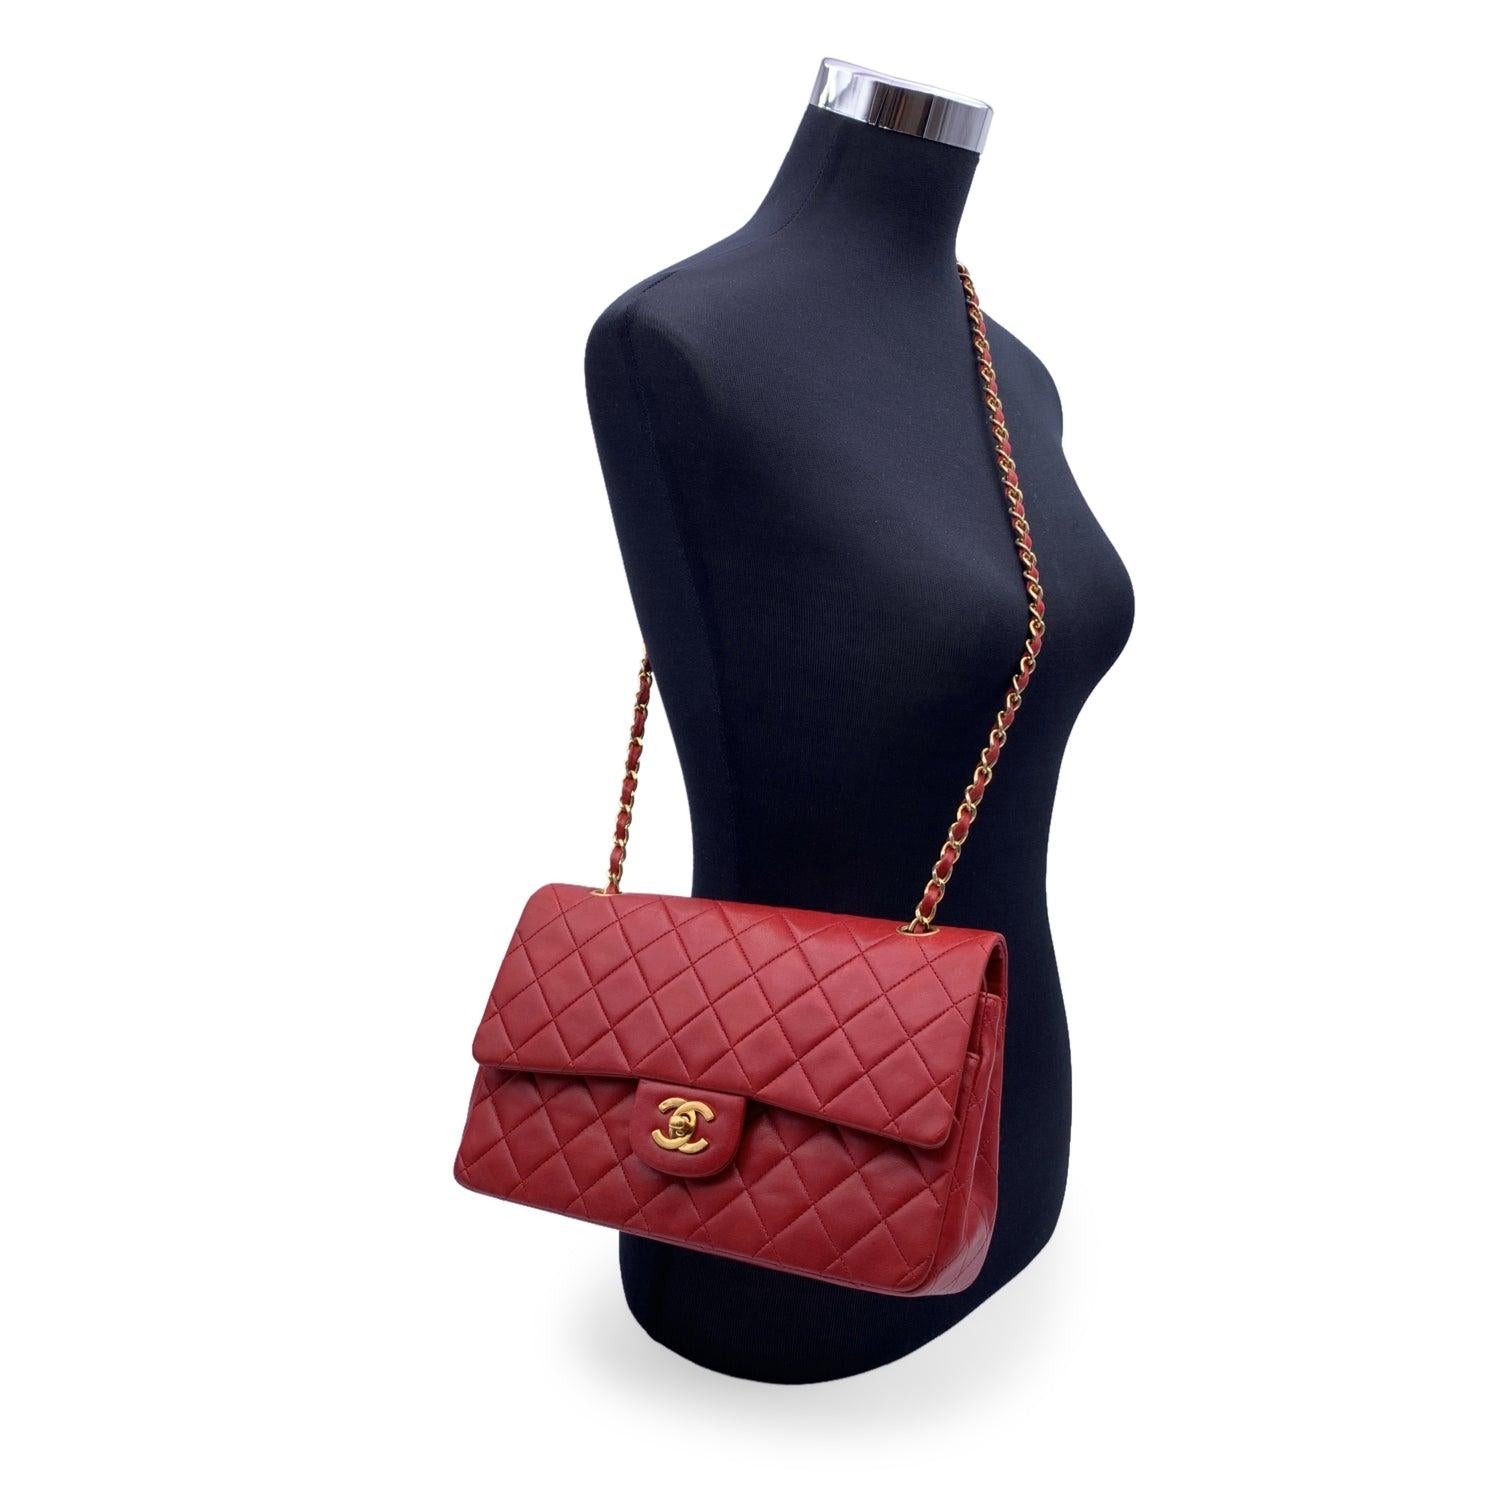 This beautiful Bag will come with a Certificate of Authenticity provided by Entrupy, leading International Fashion Authenticators. The certificate will be provided at no further cost. Chanel 'Timeless Classic 2.55 - 25 cm' Quilted Double Flap in red